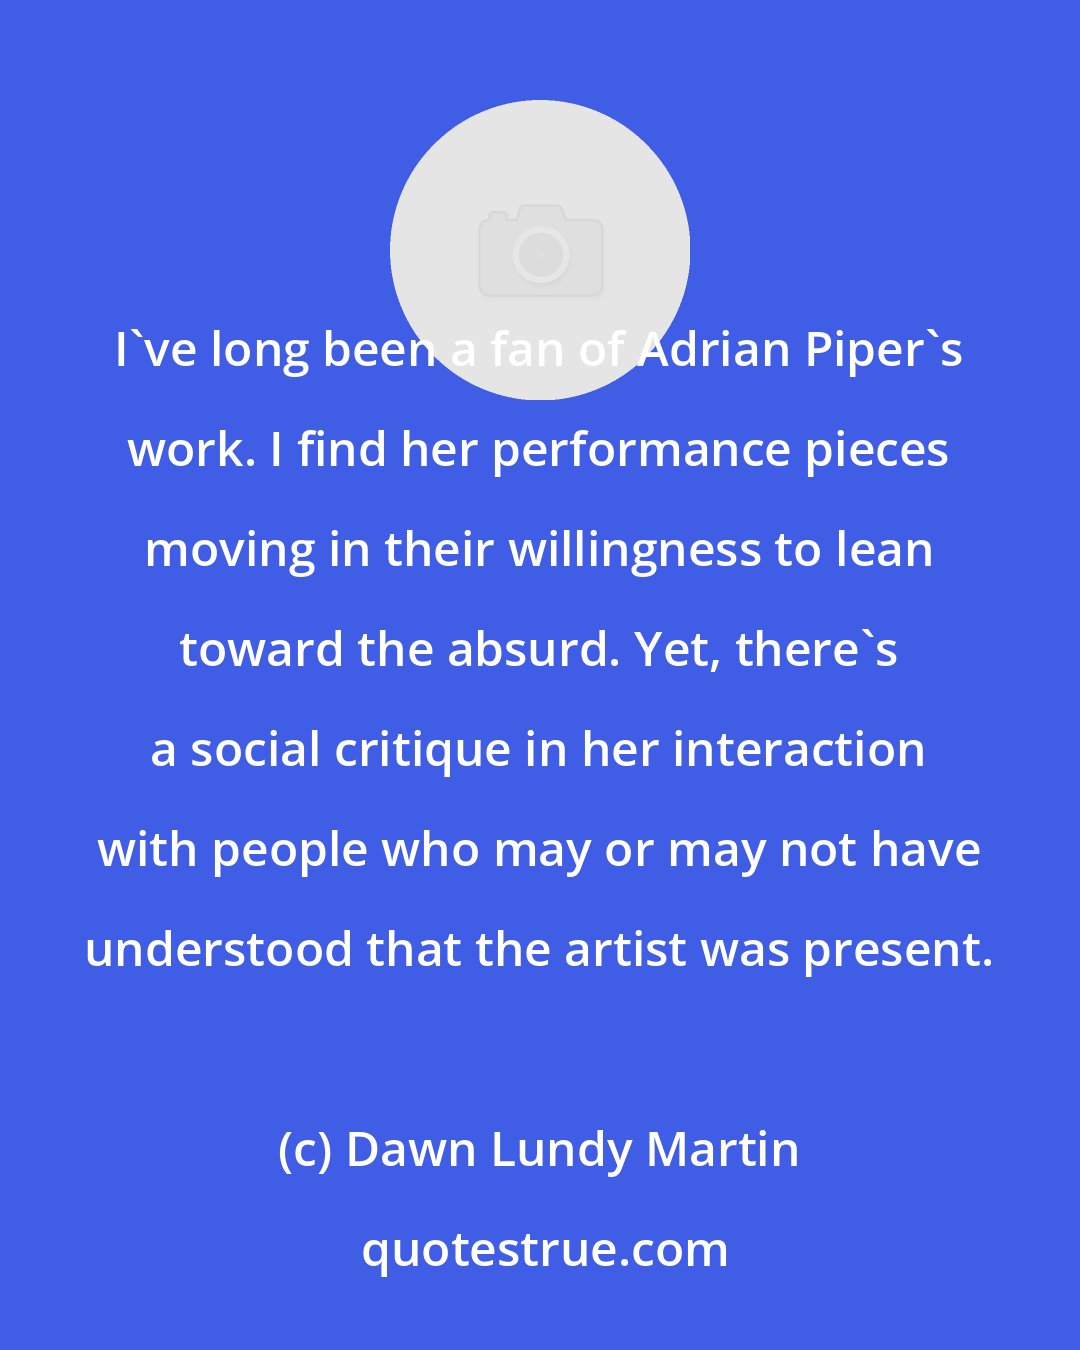 Dawn Lundy Martin: I've long been a fan of Adrian Piper's work. I find her performance pieces moving in their willingness to lean toward the absurd. Yet, there's a social critique in her interaction with people who may or may not have understood that the artist was present.